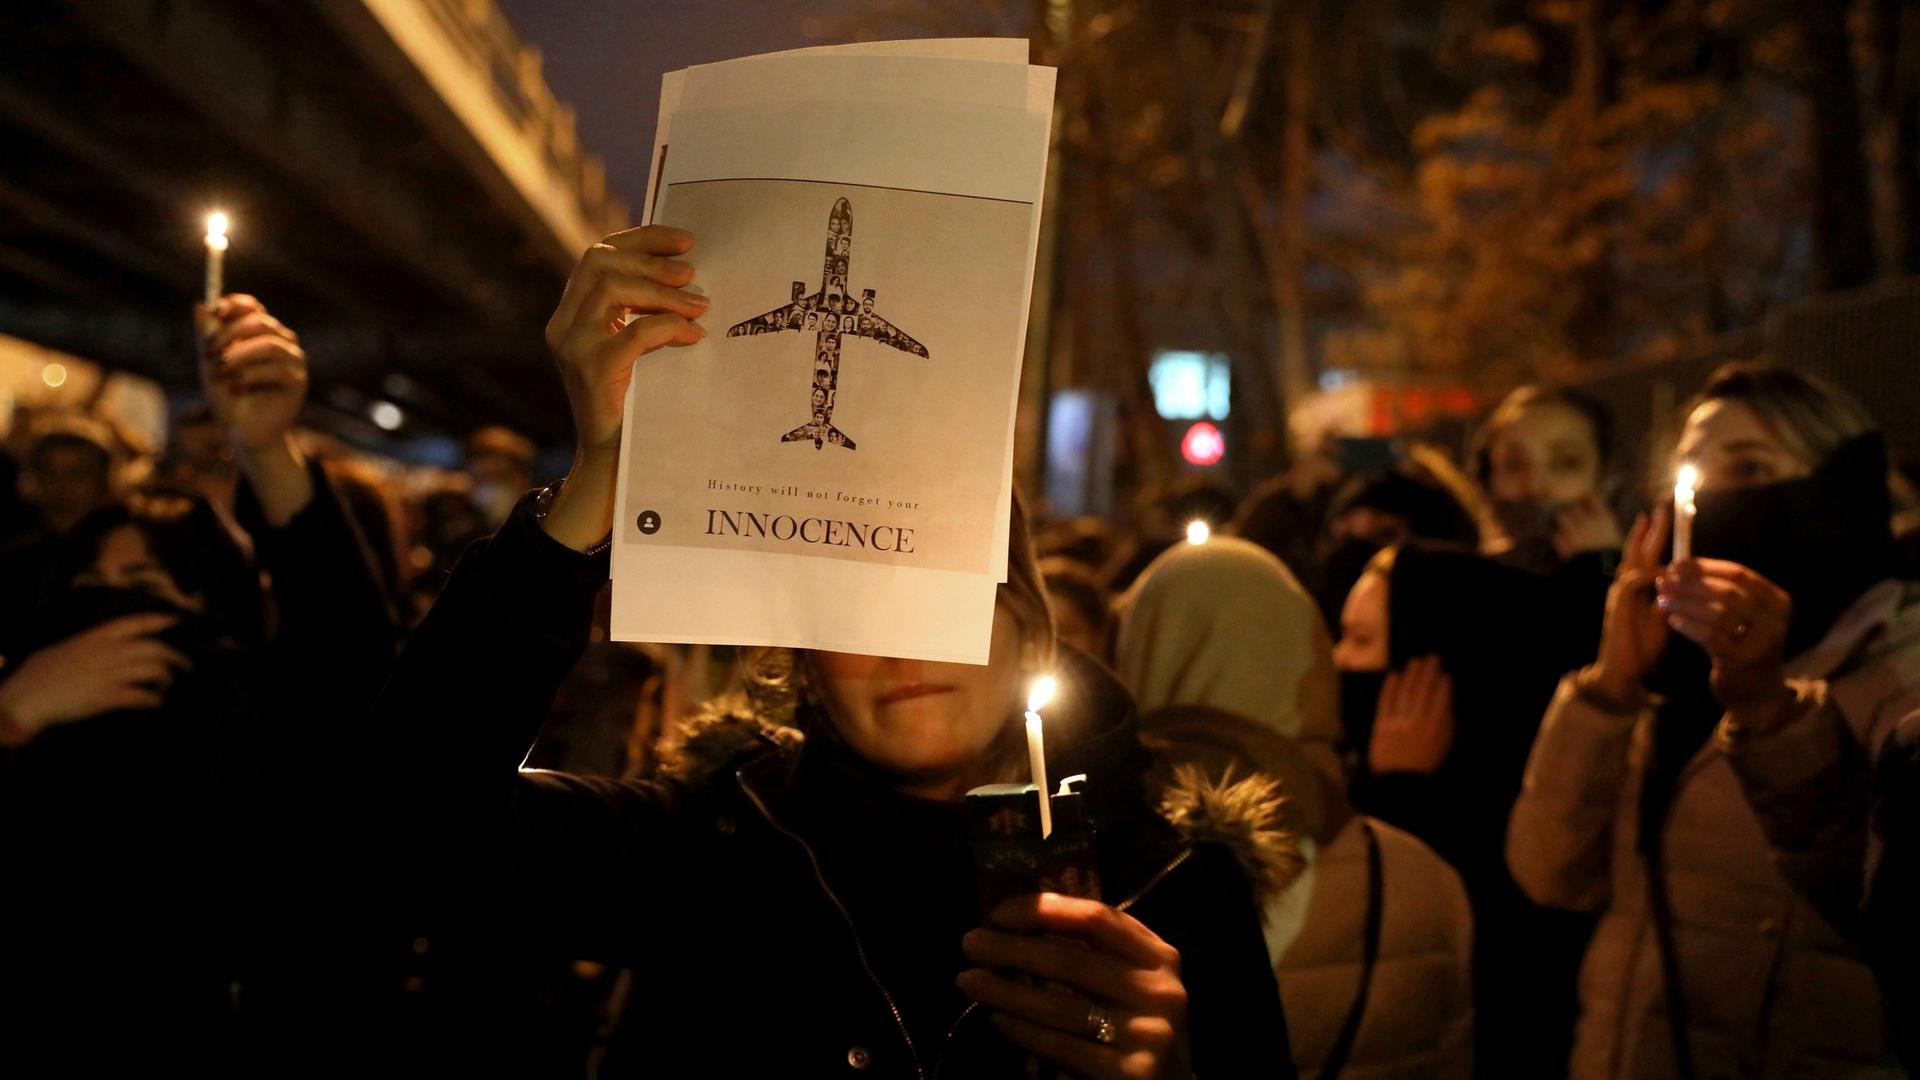 A crowd of people are shown at night holding candles with one person holding a poster of an aircraft with the word "Innocent" printed on it.